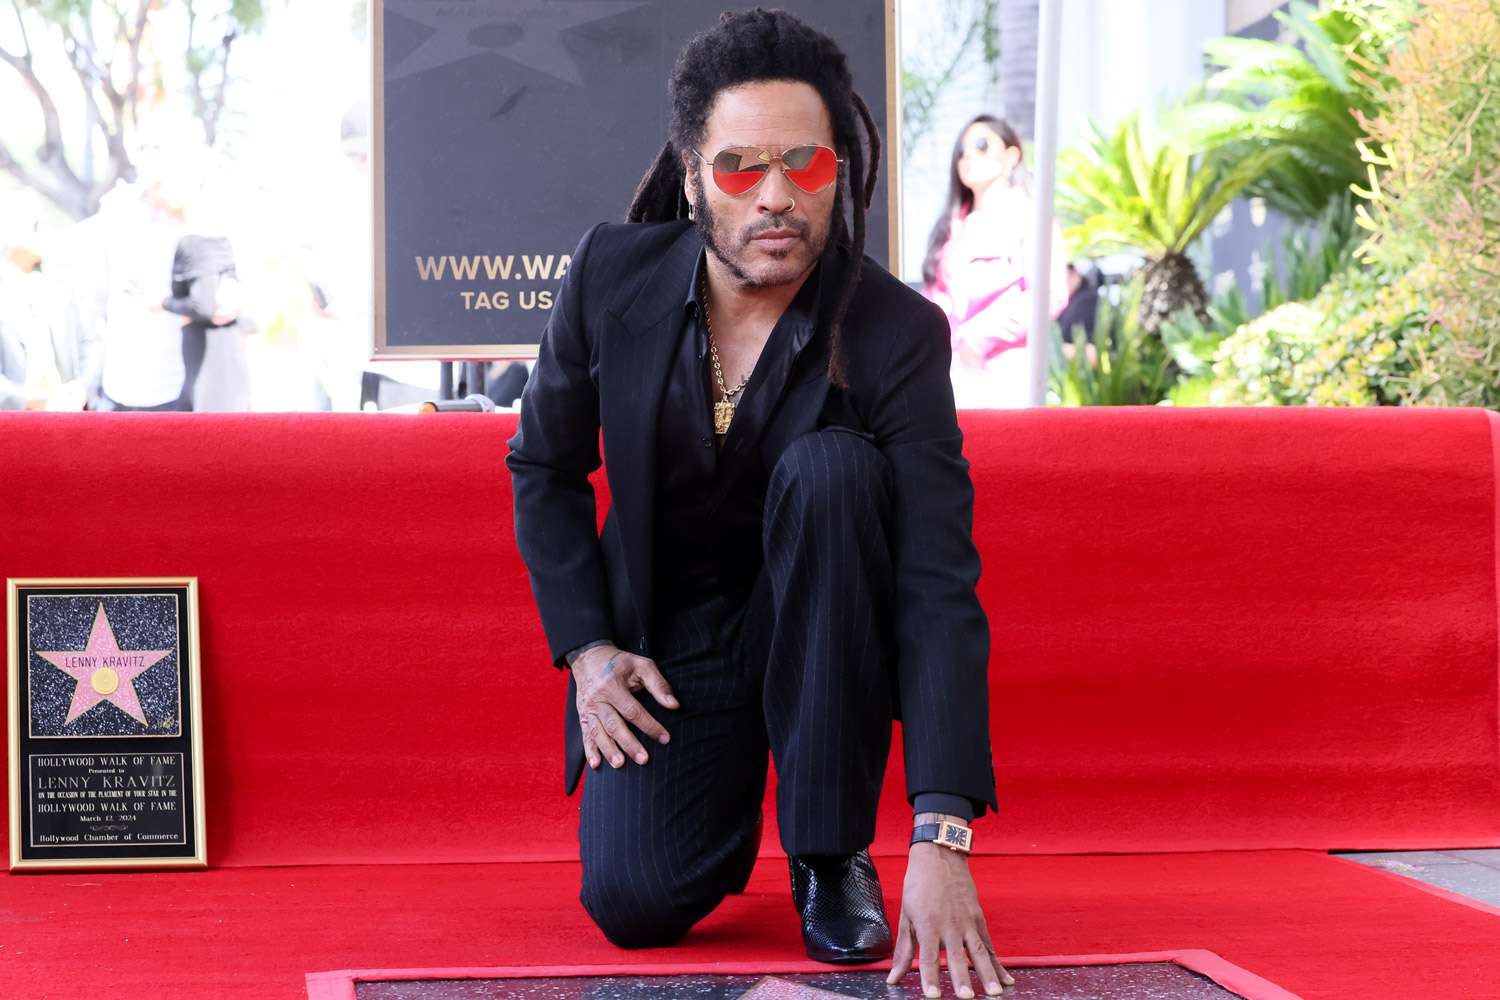 Lenny Kravitz Says It Feels 'Surreal' to Have a Star on the Hollywood Walk of Fame